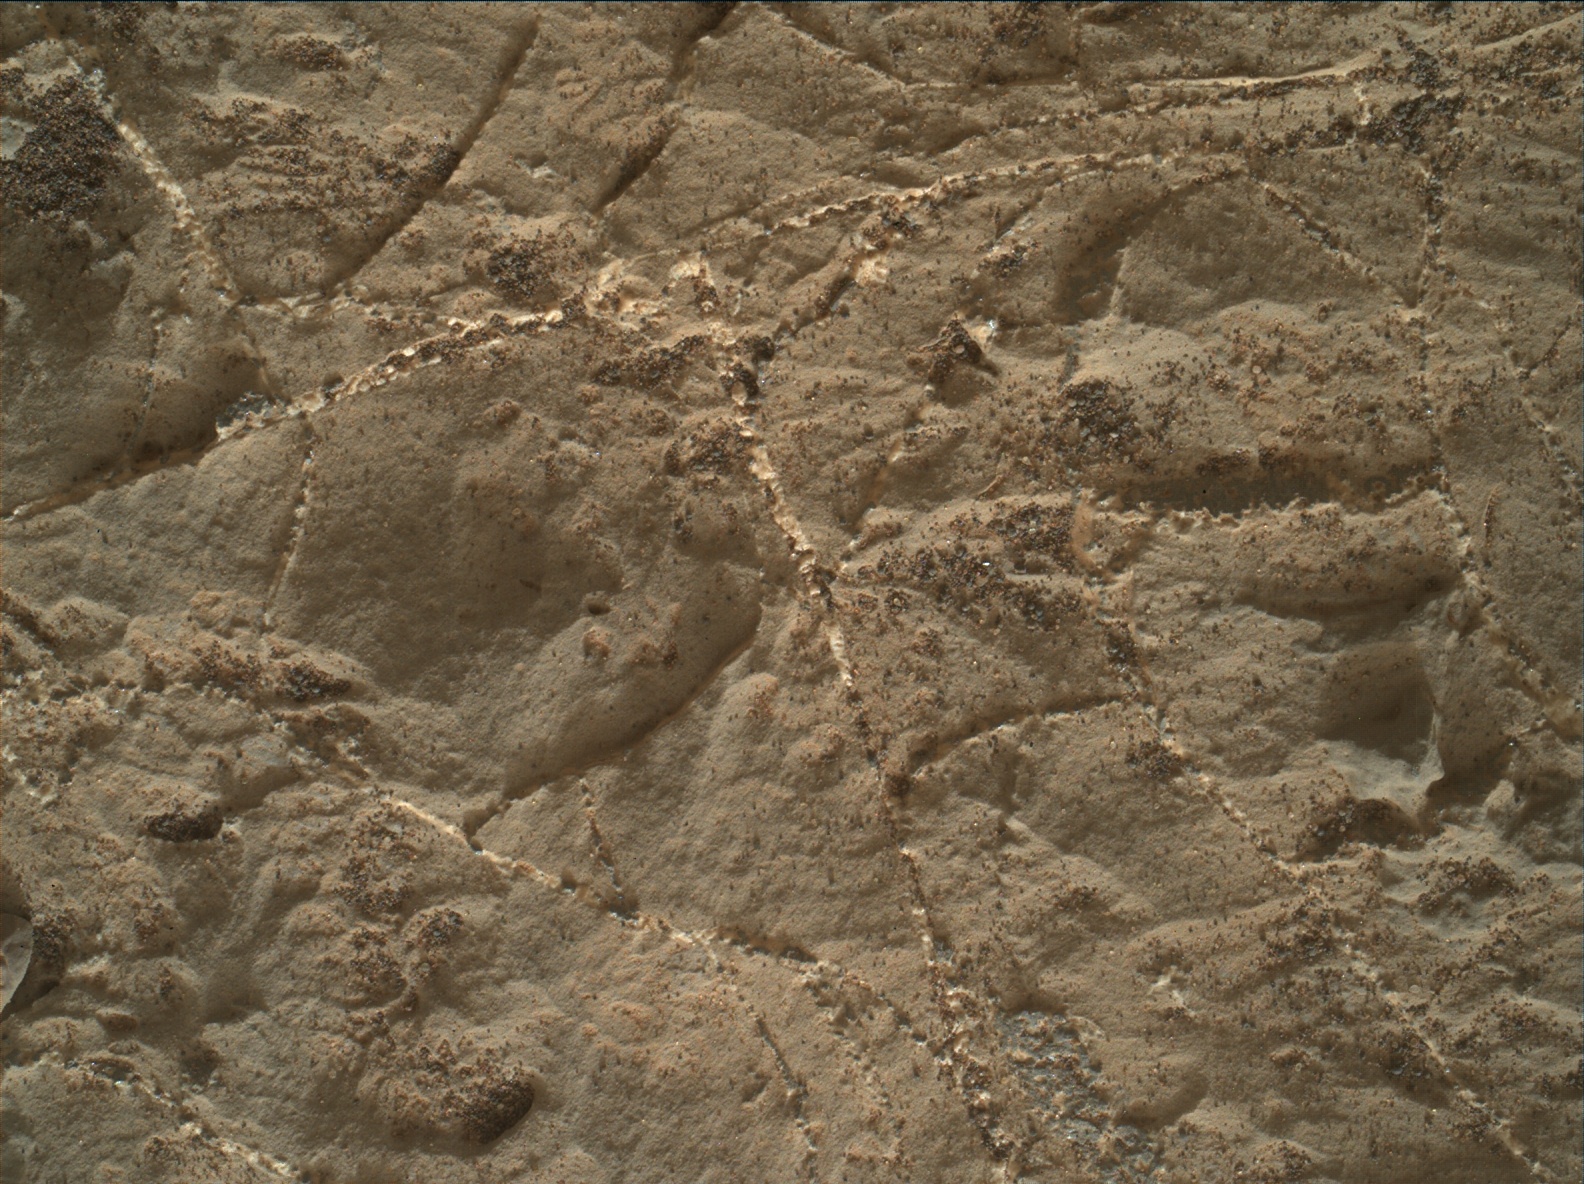 Nasa's Mars rover Curiosity acquired this image using its Mars Hand Lens Imager (MAHLI) on Sol 2221